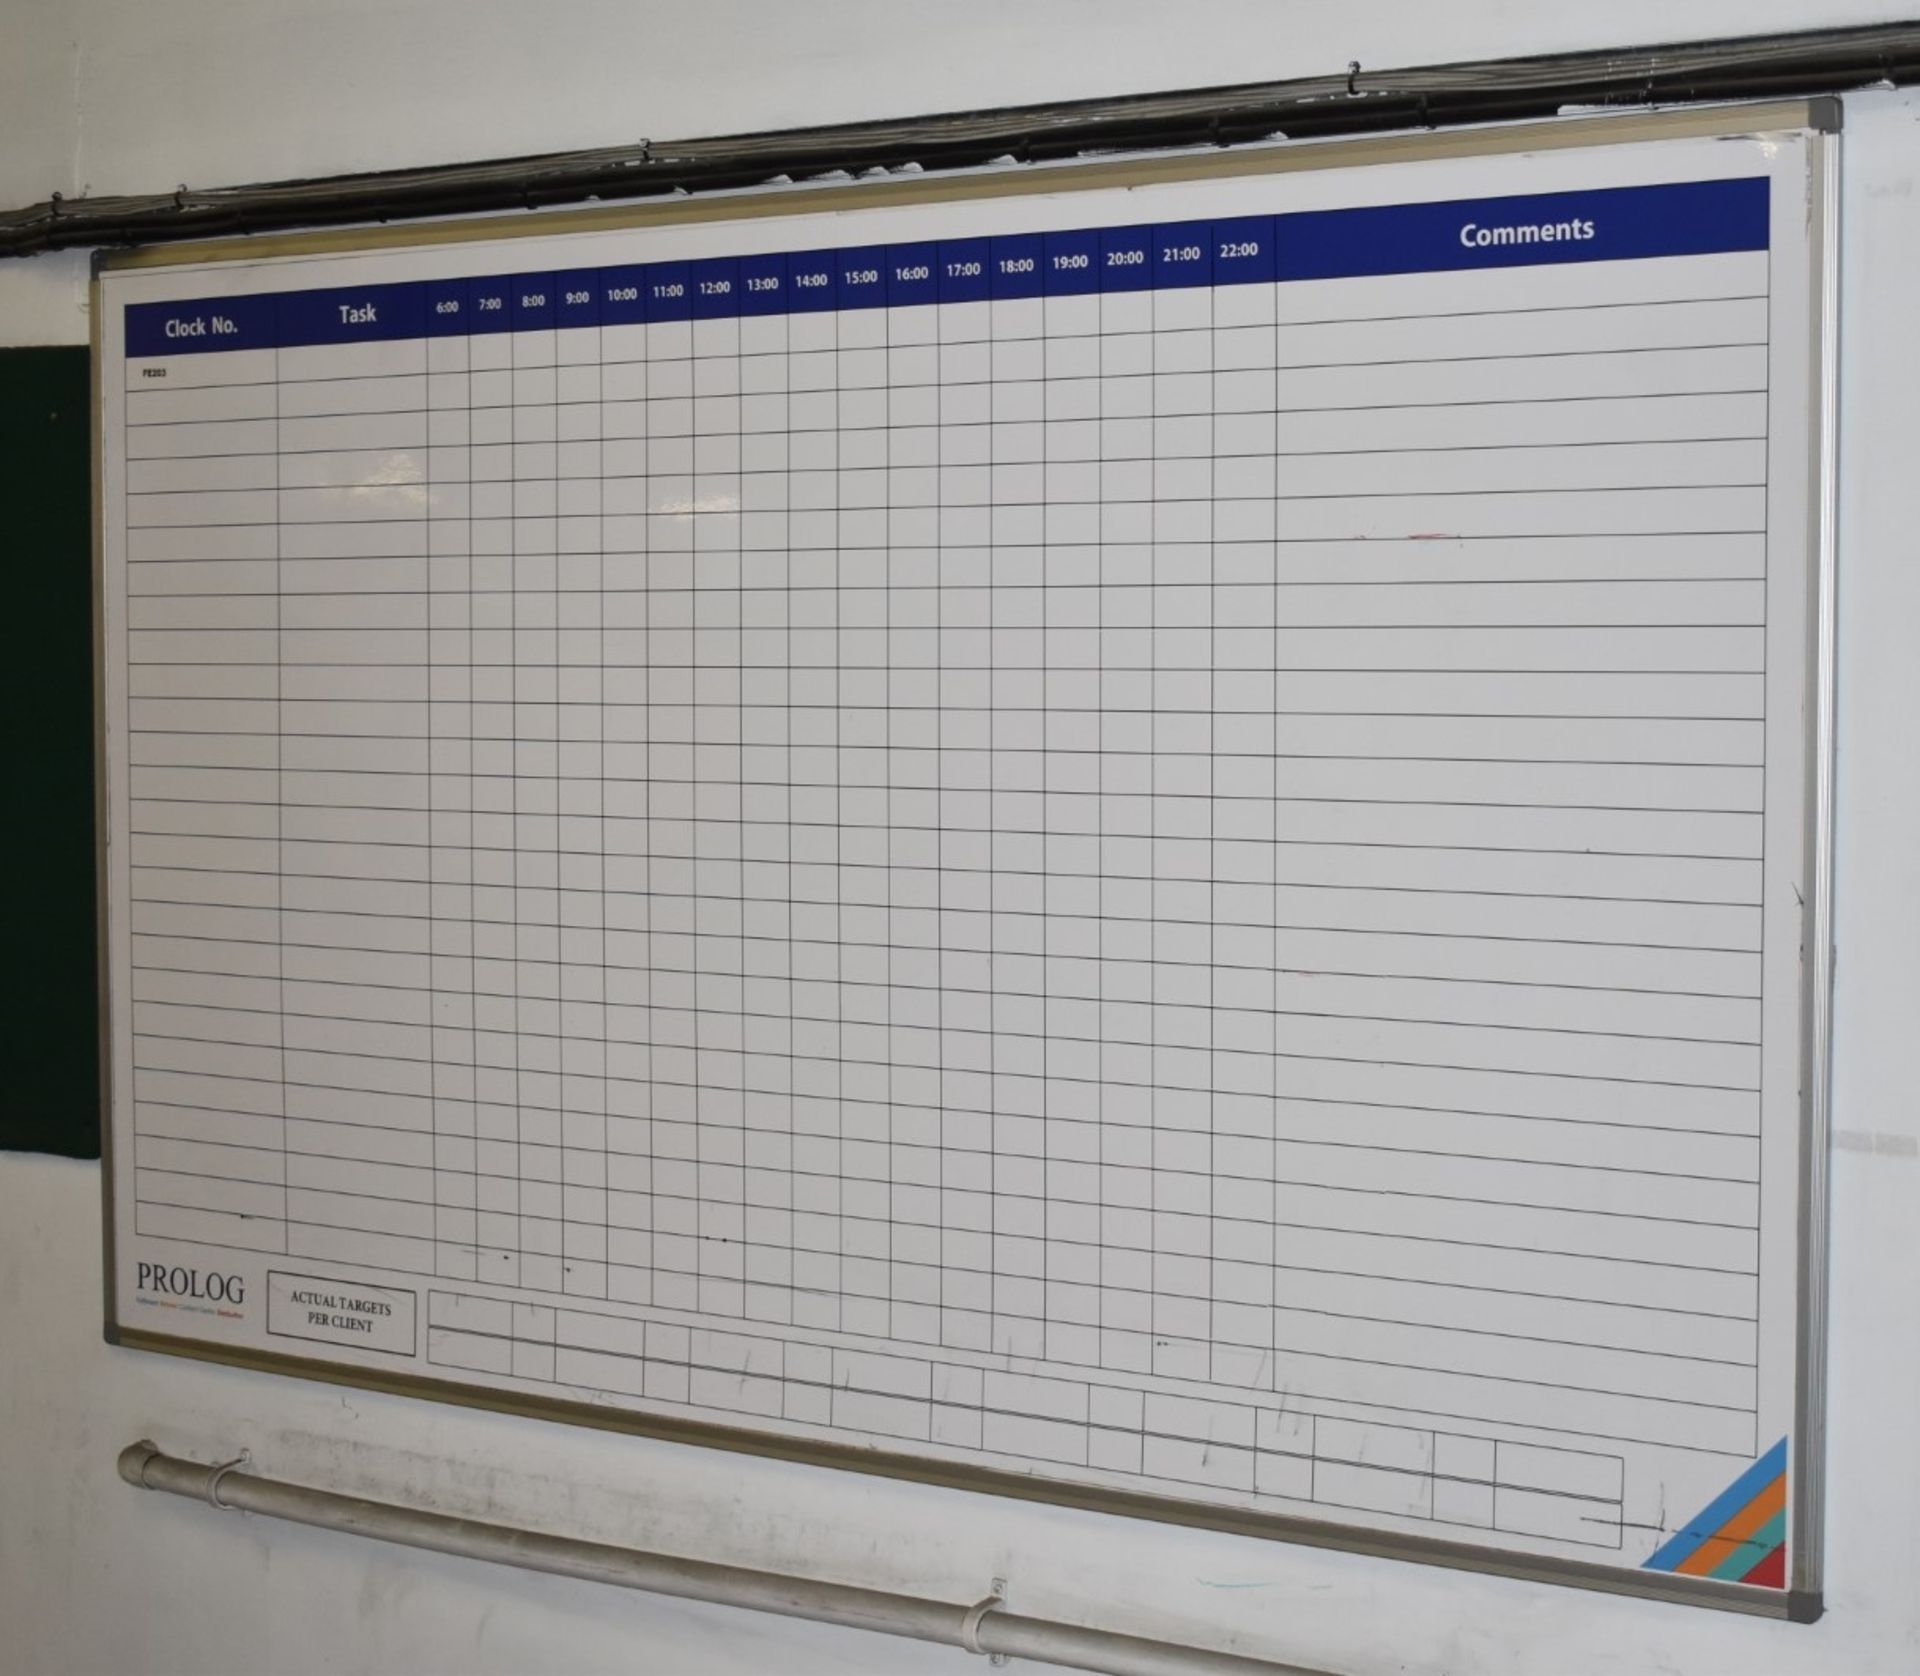 1 x Warehouse Day Planner White Board - Wall Mounted - 200 x 120 cms - Ref FE203 WH - CL480 -